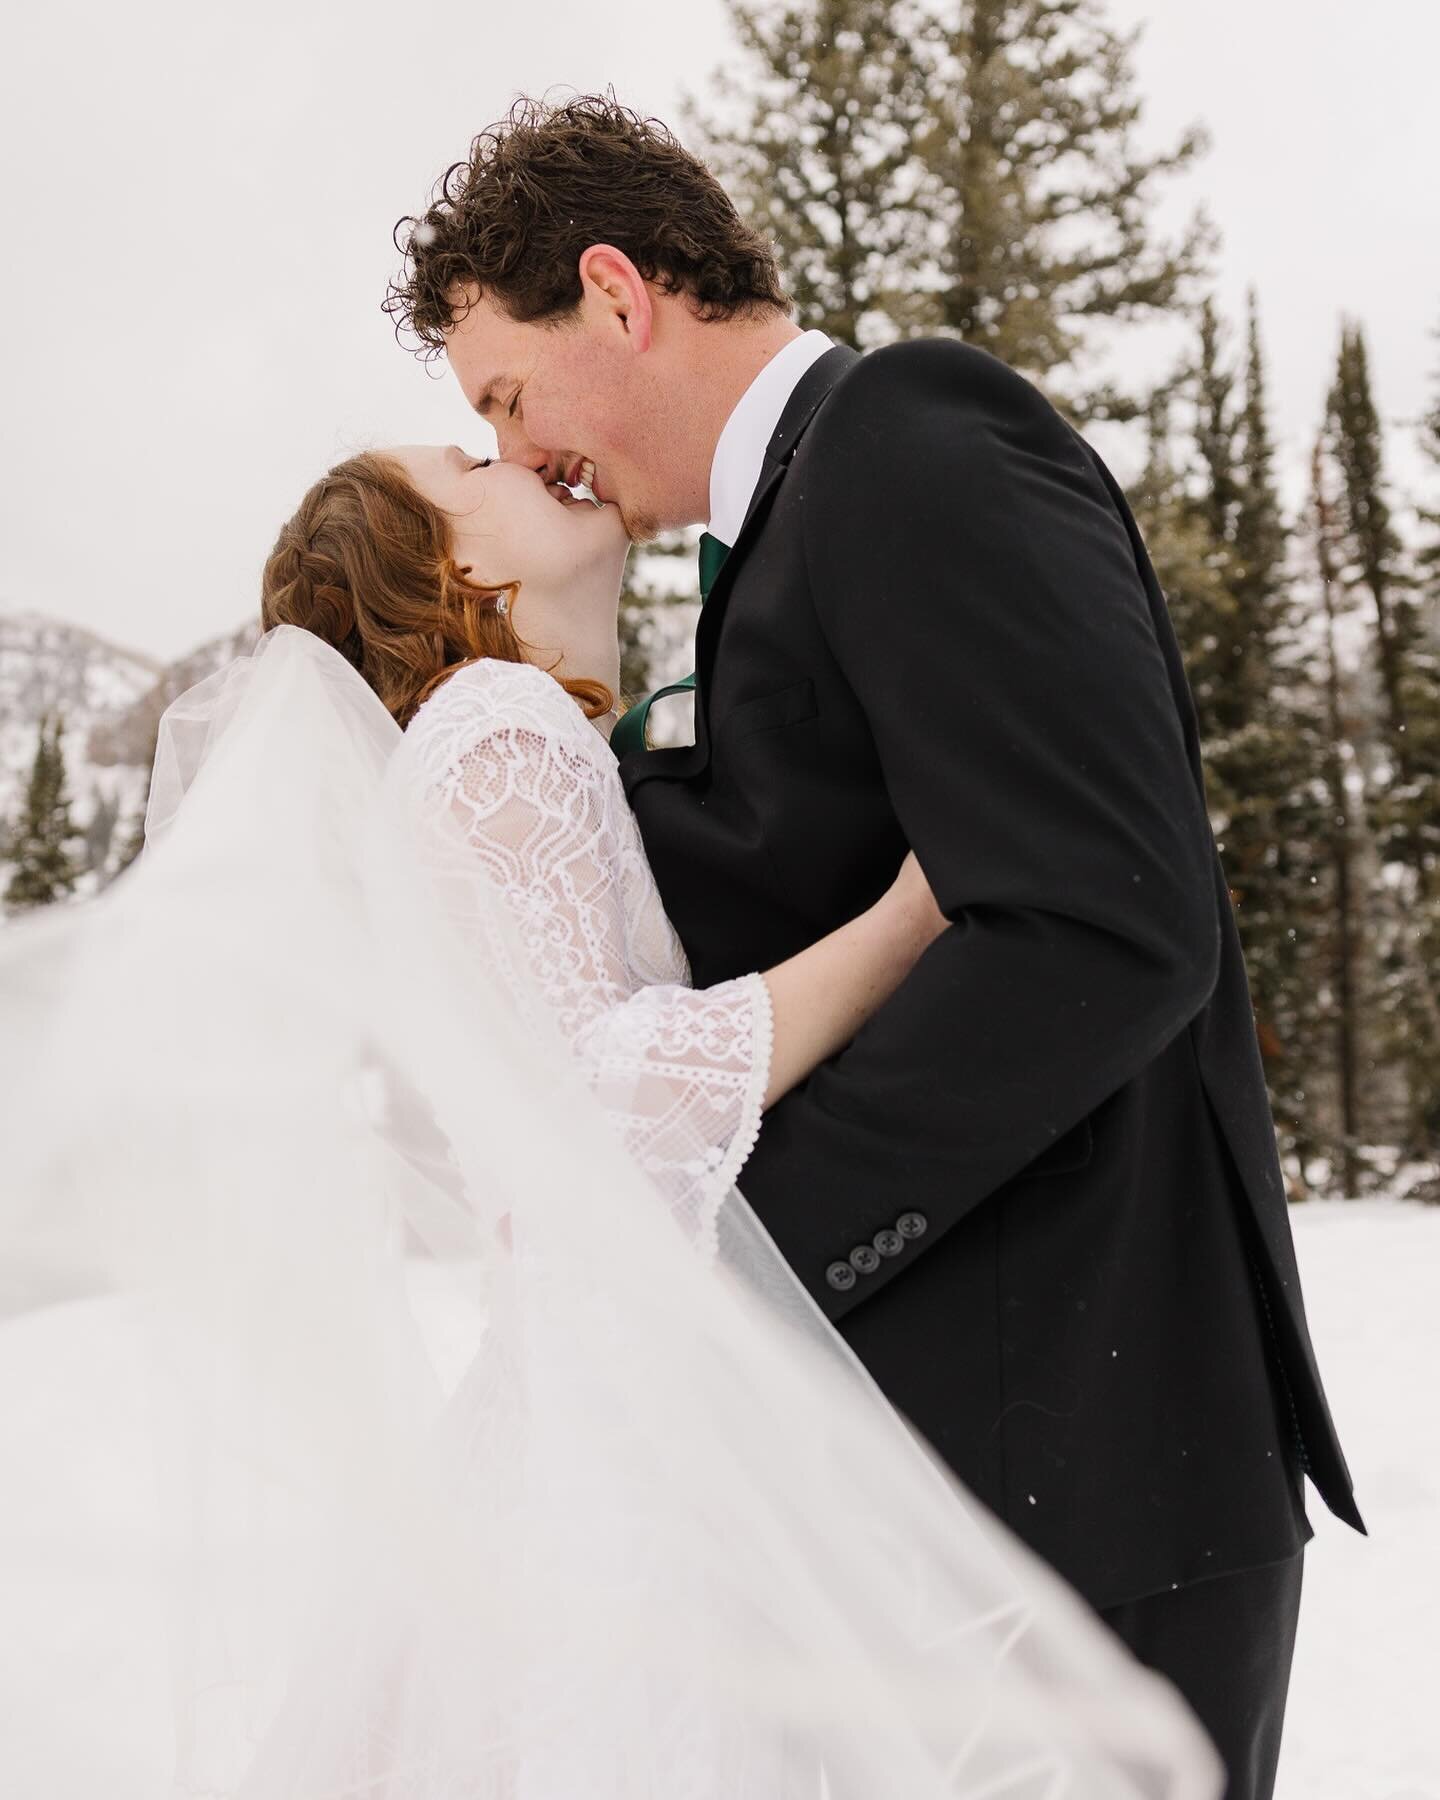 It was freezing, windy and slightly snowing when we did these photos and Harlee and Jason were rockstars! I&rsquo;m so excited for them to get married tomorrow! &bull;
&bull;
&bull;
&bull;
&bull;
 #bridals #utahbridals #jamietervortphotography #utahb